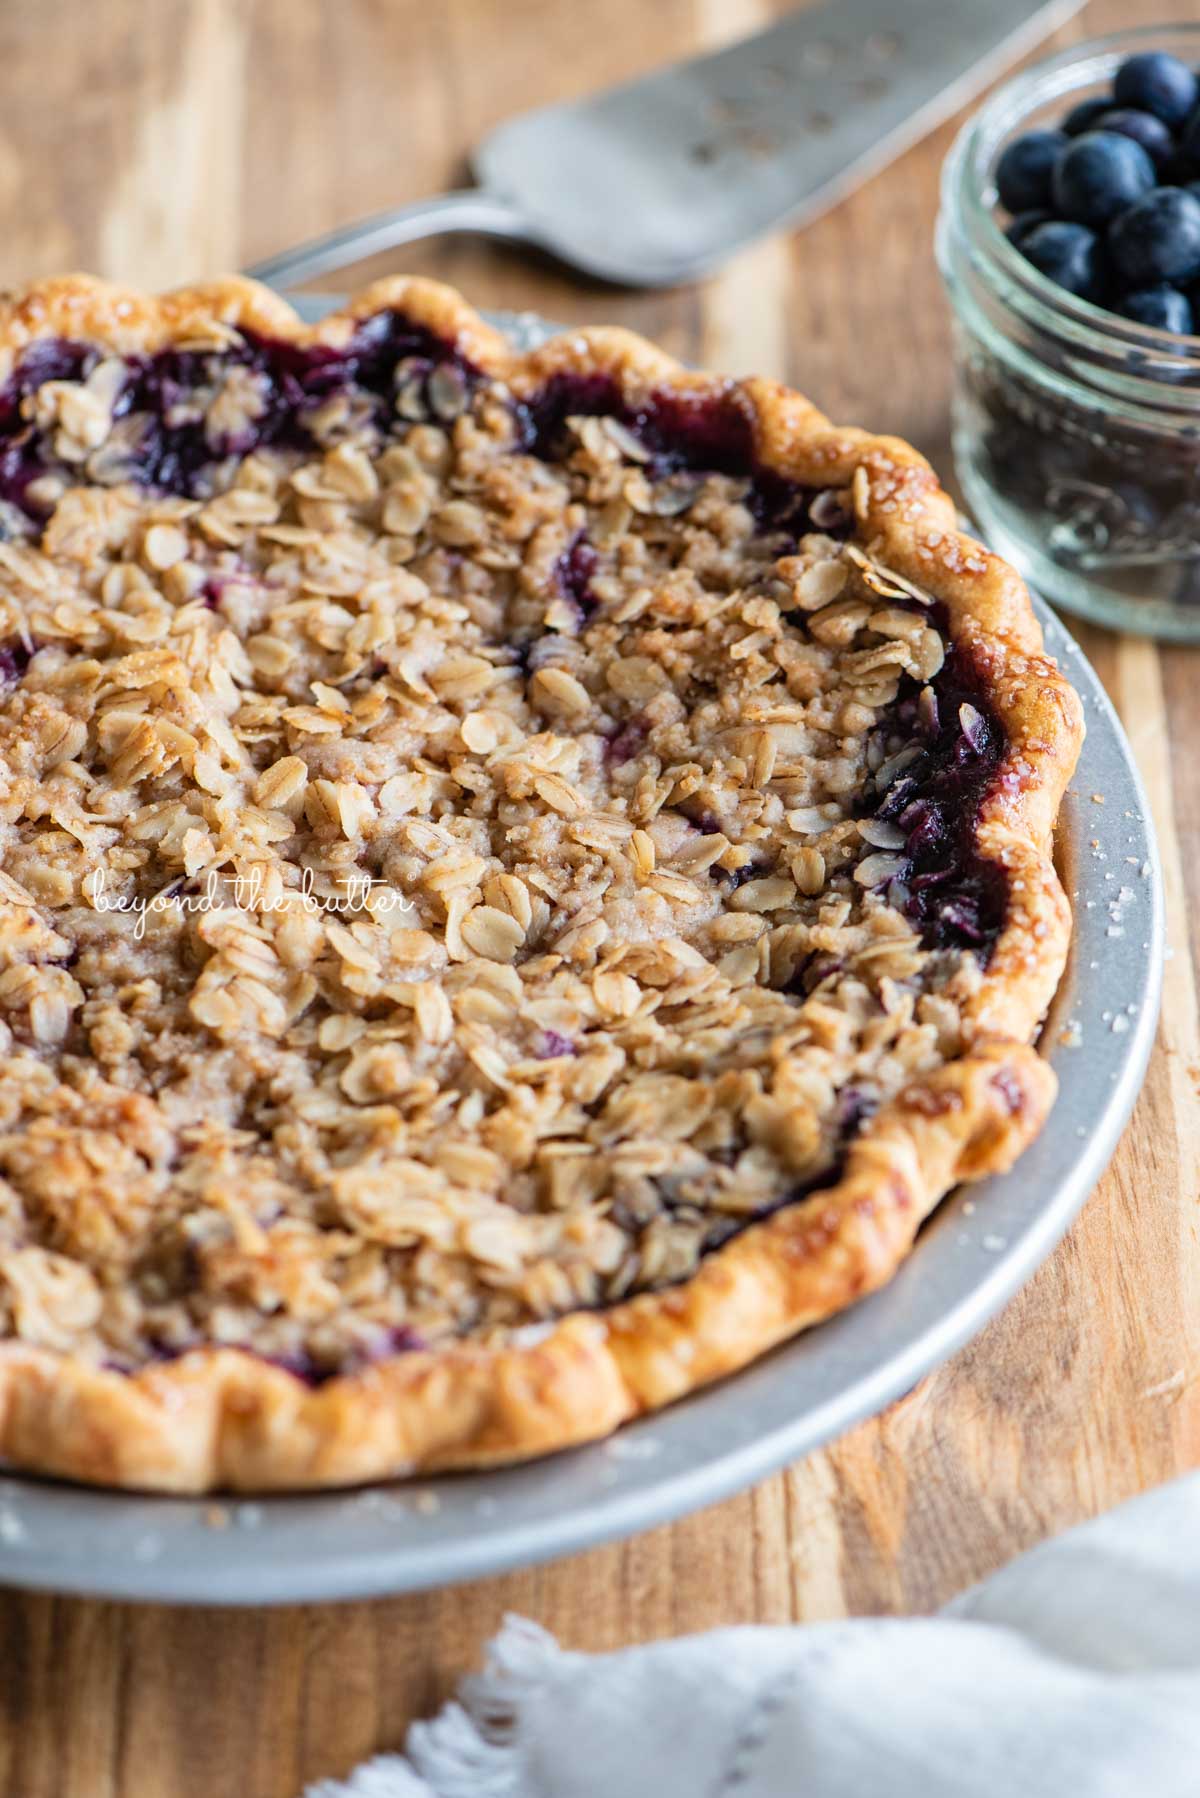 Just baked blueberry crumble pie | © Beyond the Butter®